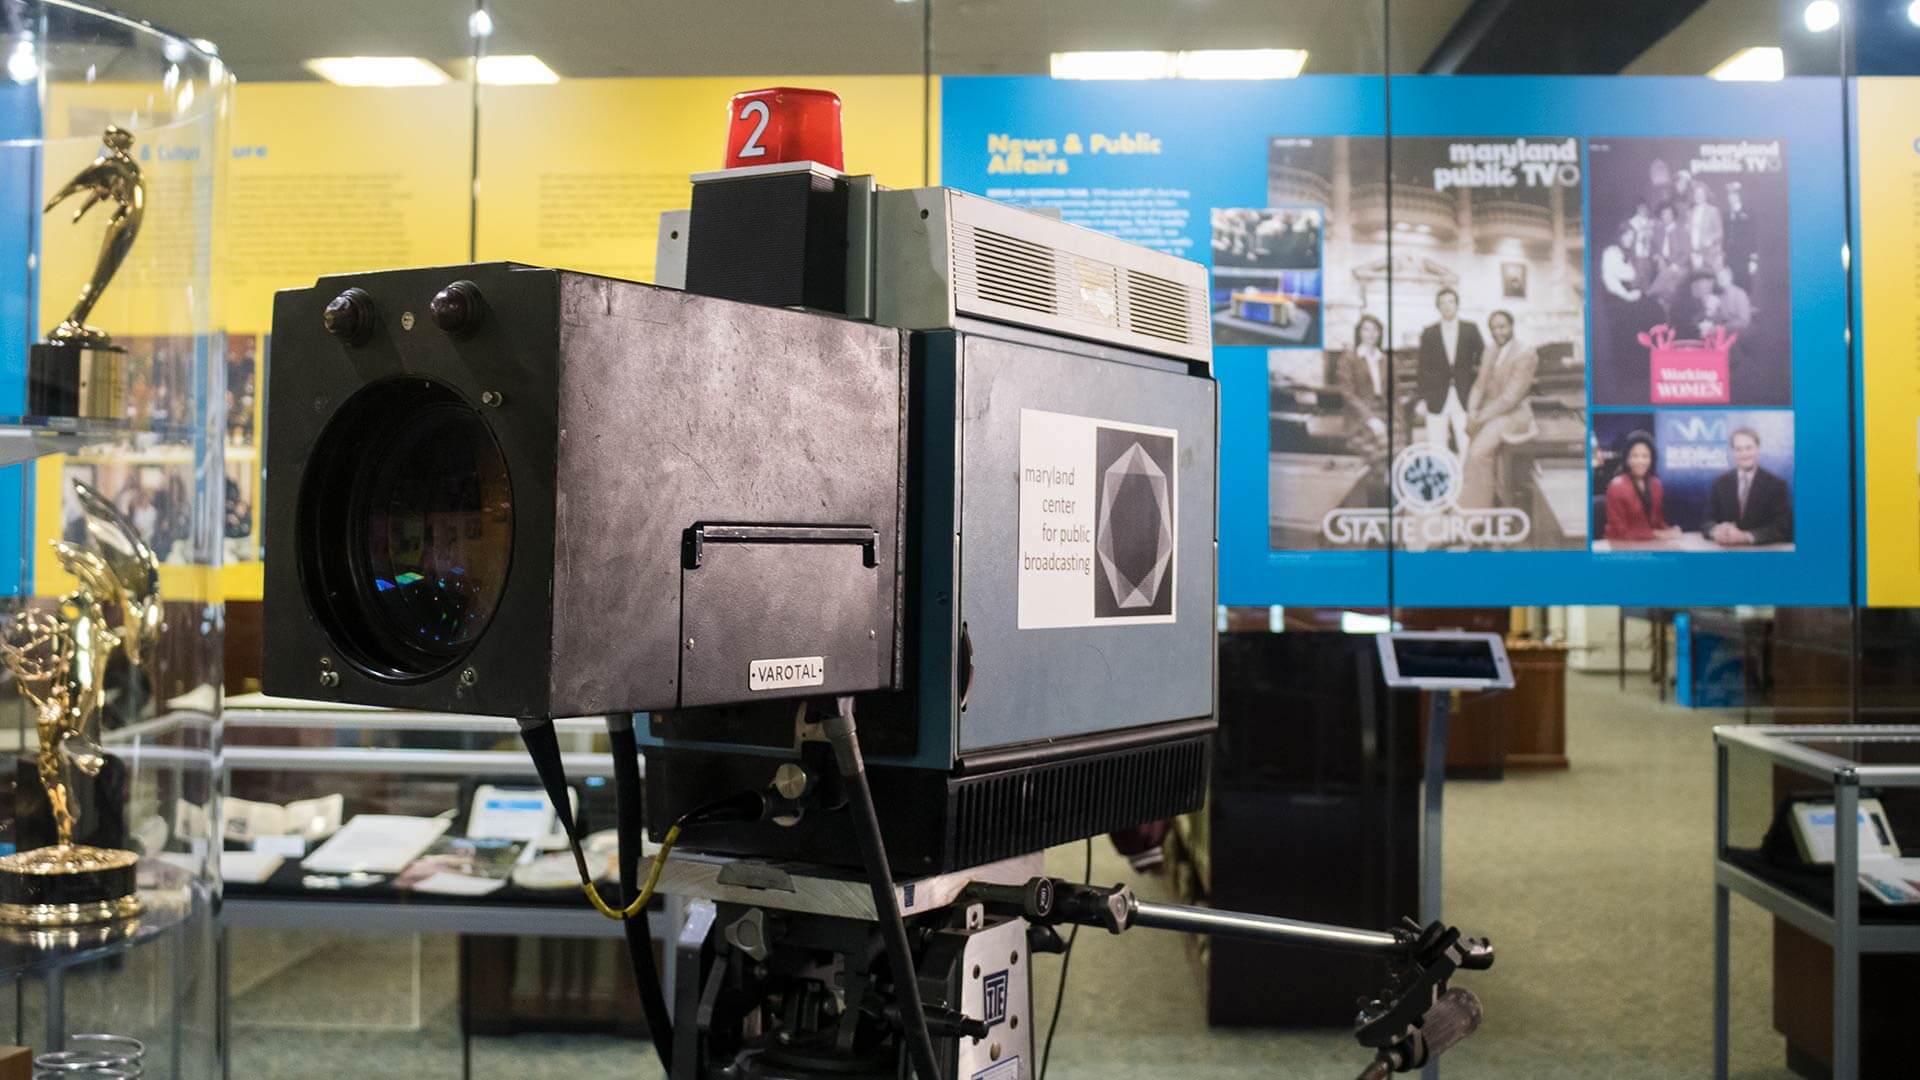 Old-fashioned video camera that reads "Maryland Center for Public Broadcasting"